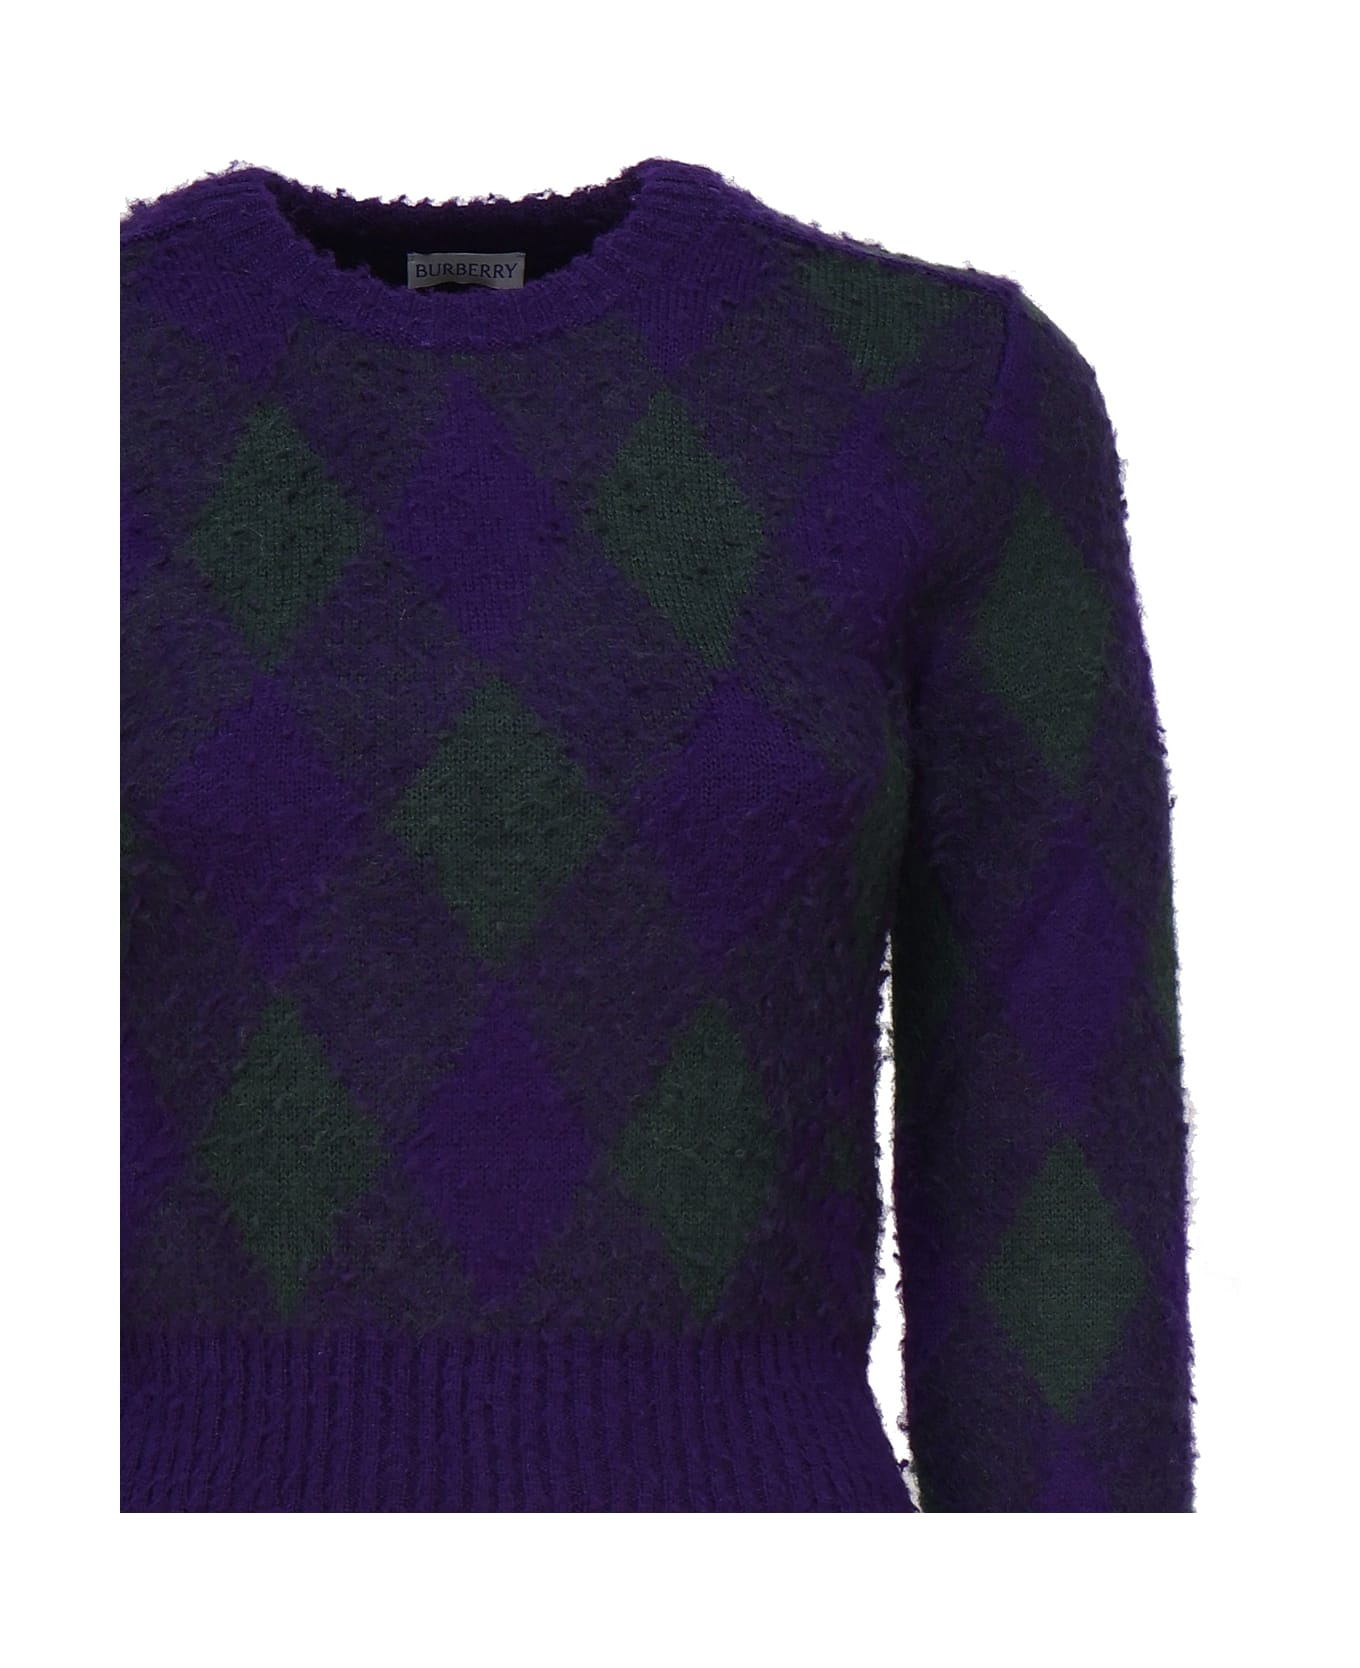 Burberry Cropped Sweater In Argyle Wool - Royal